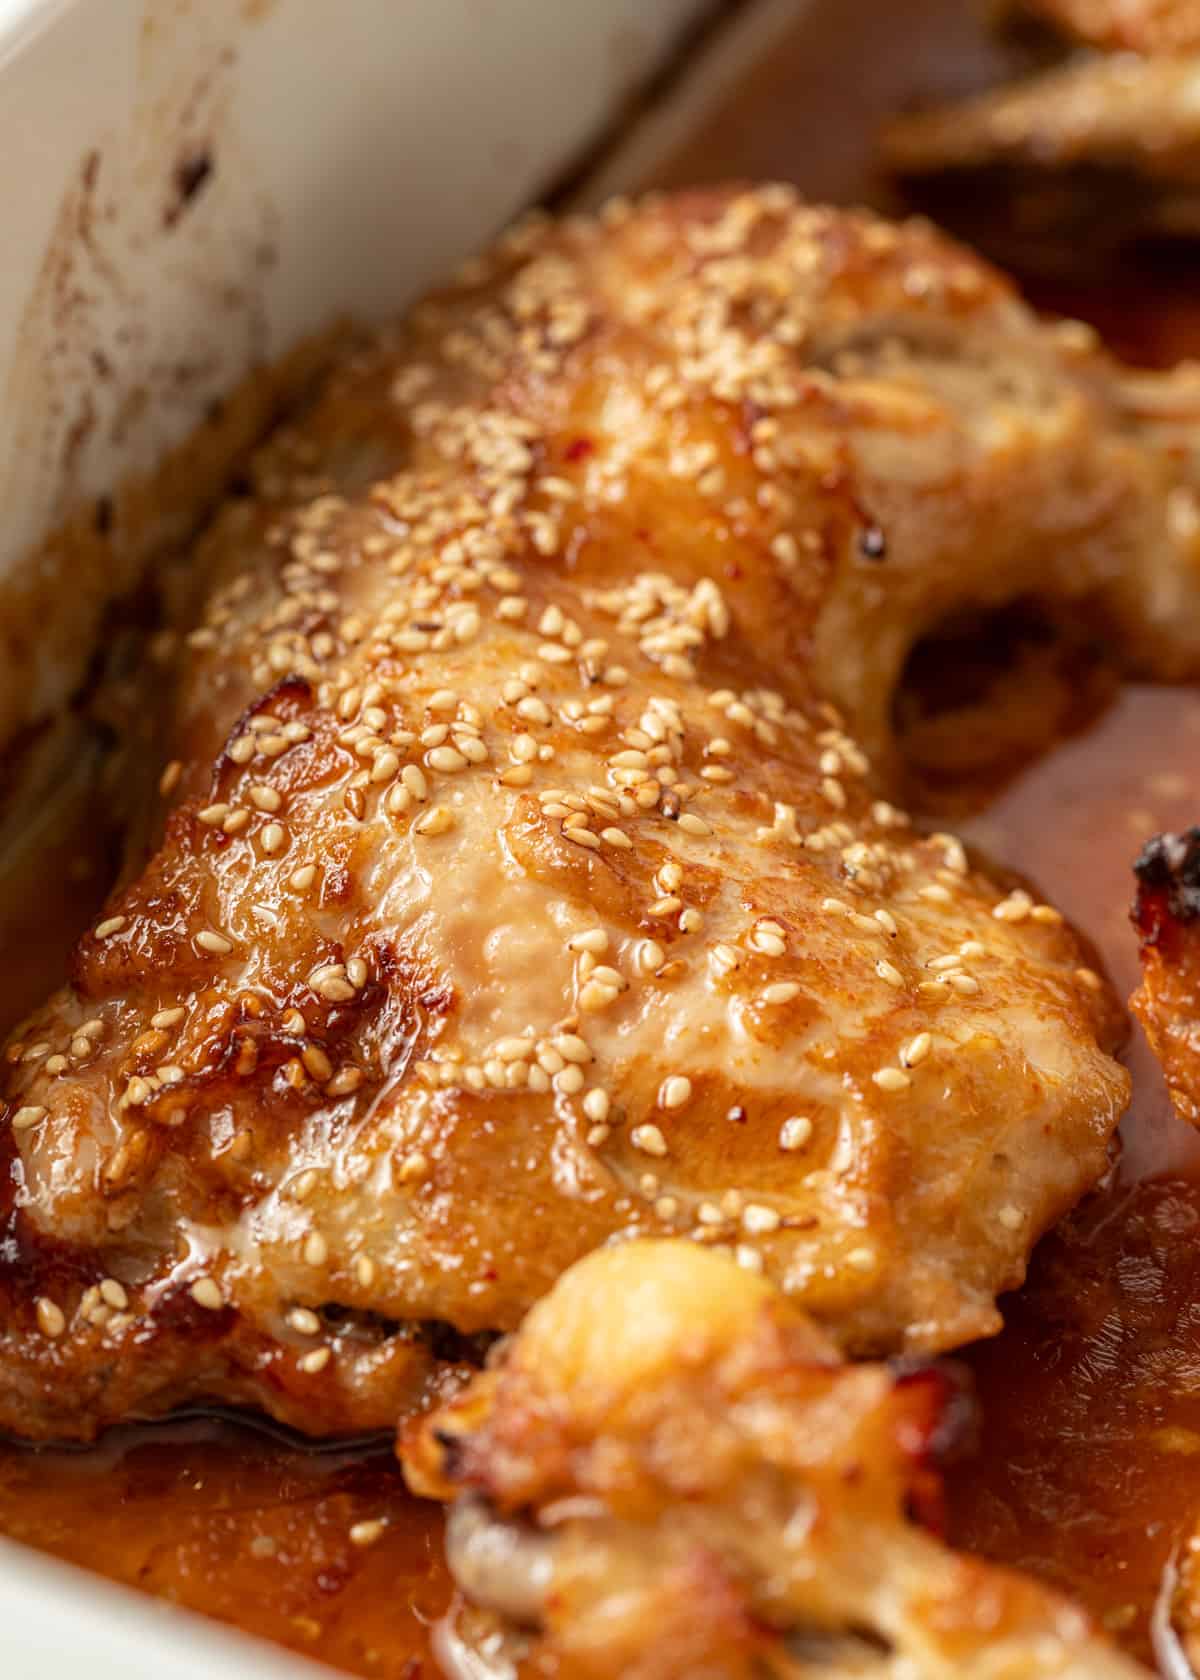 extreme closeup: miso chicken with sesame seeds on skin